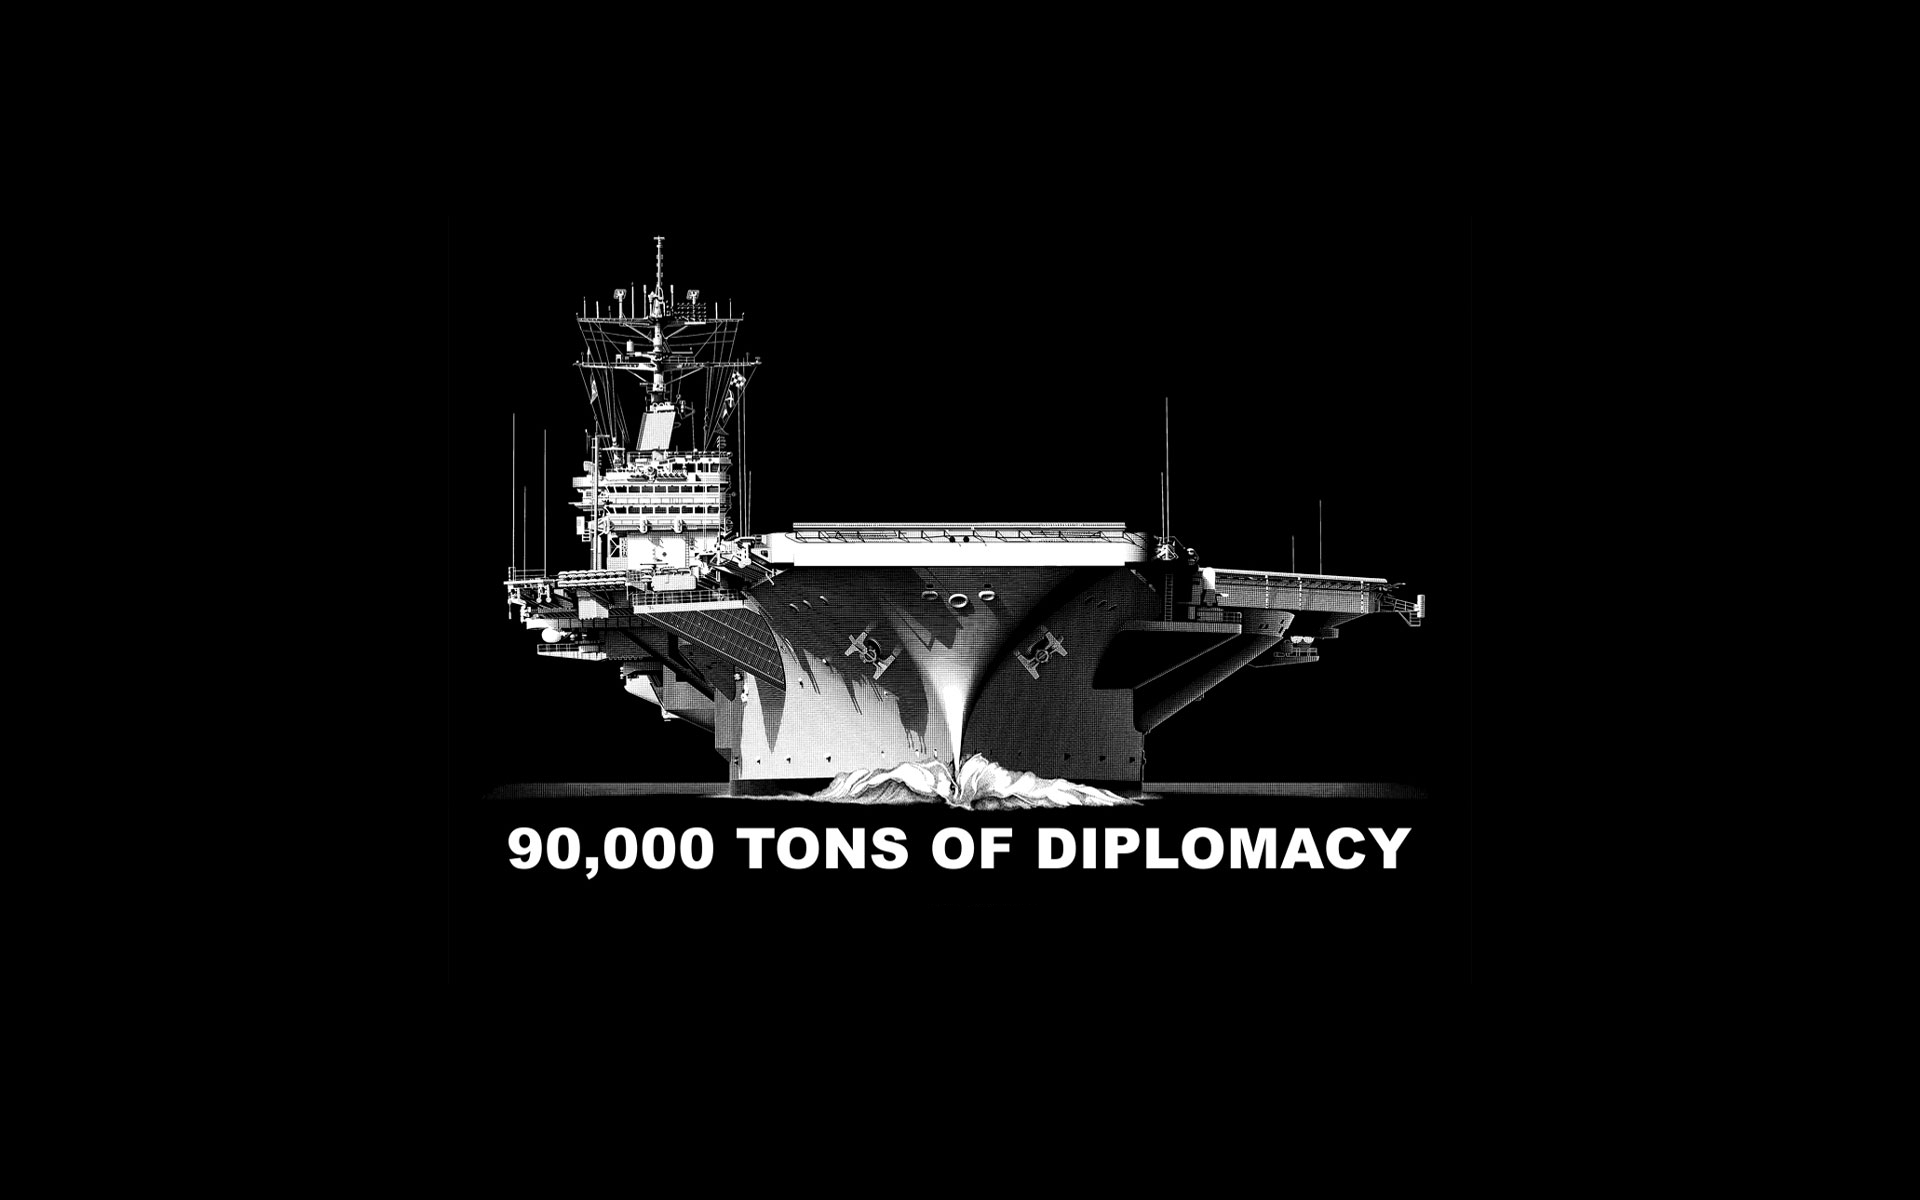 diplomacy, Black, Bw, Aircraft, Carrier, Military, Ships, Watercrafts, Text, Quotes Wallpaper